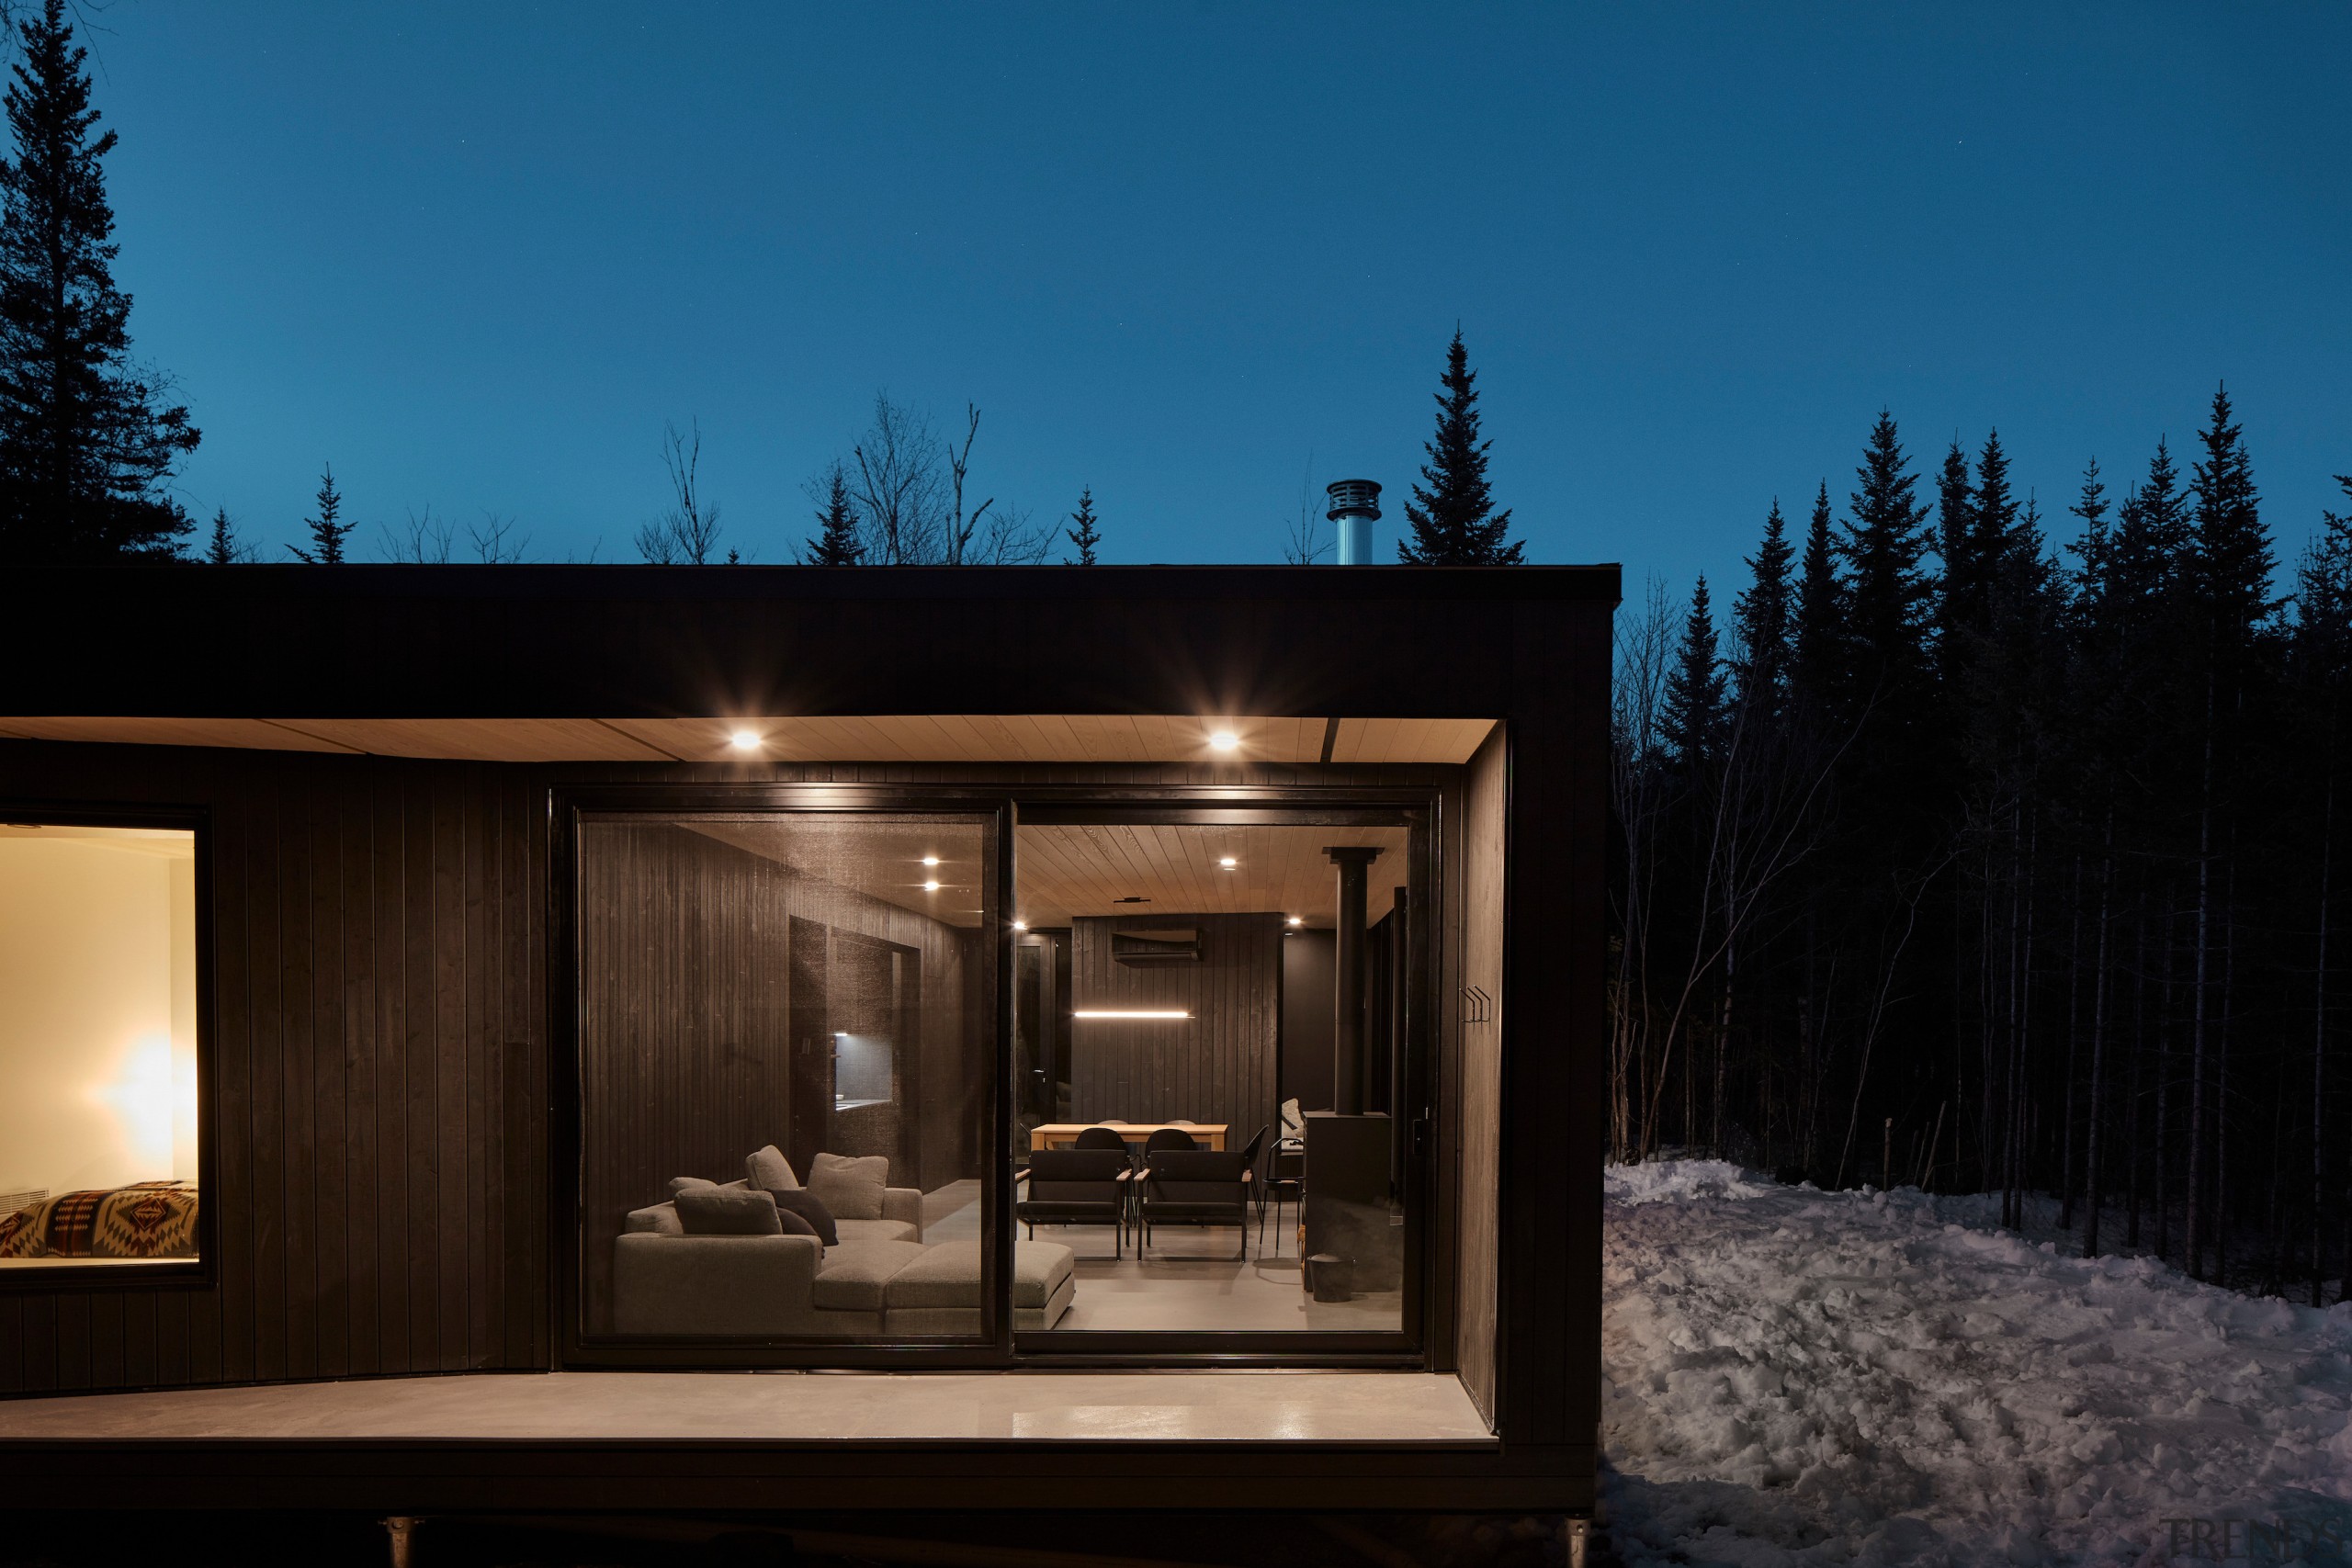 One of the cabins as night – the 